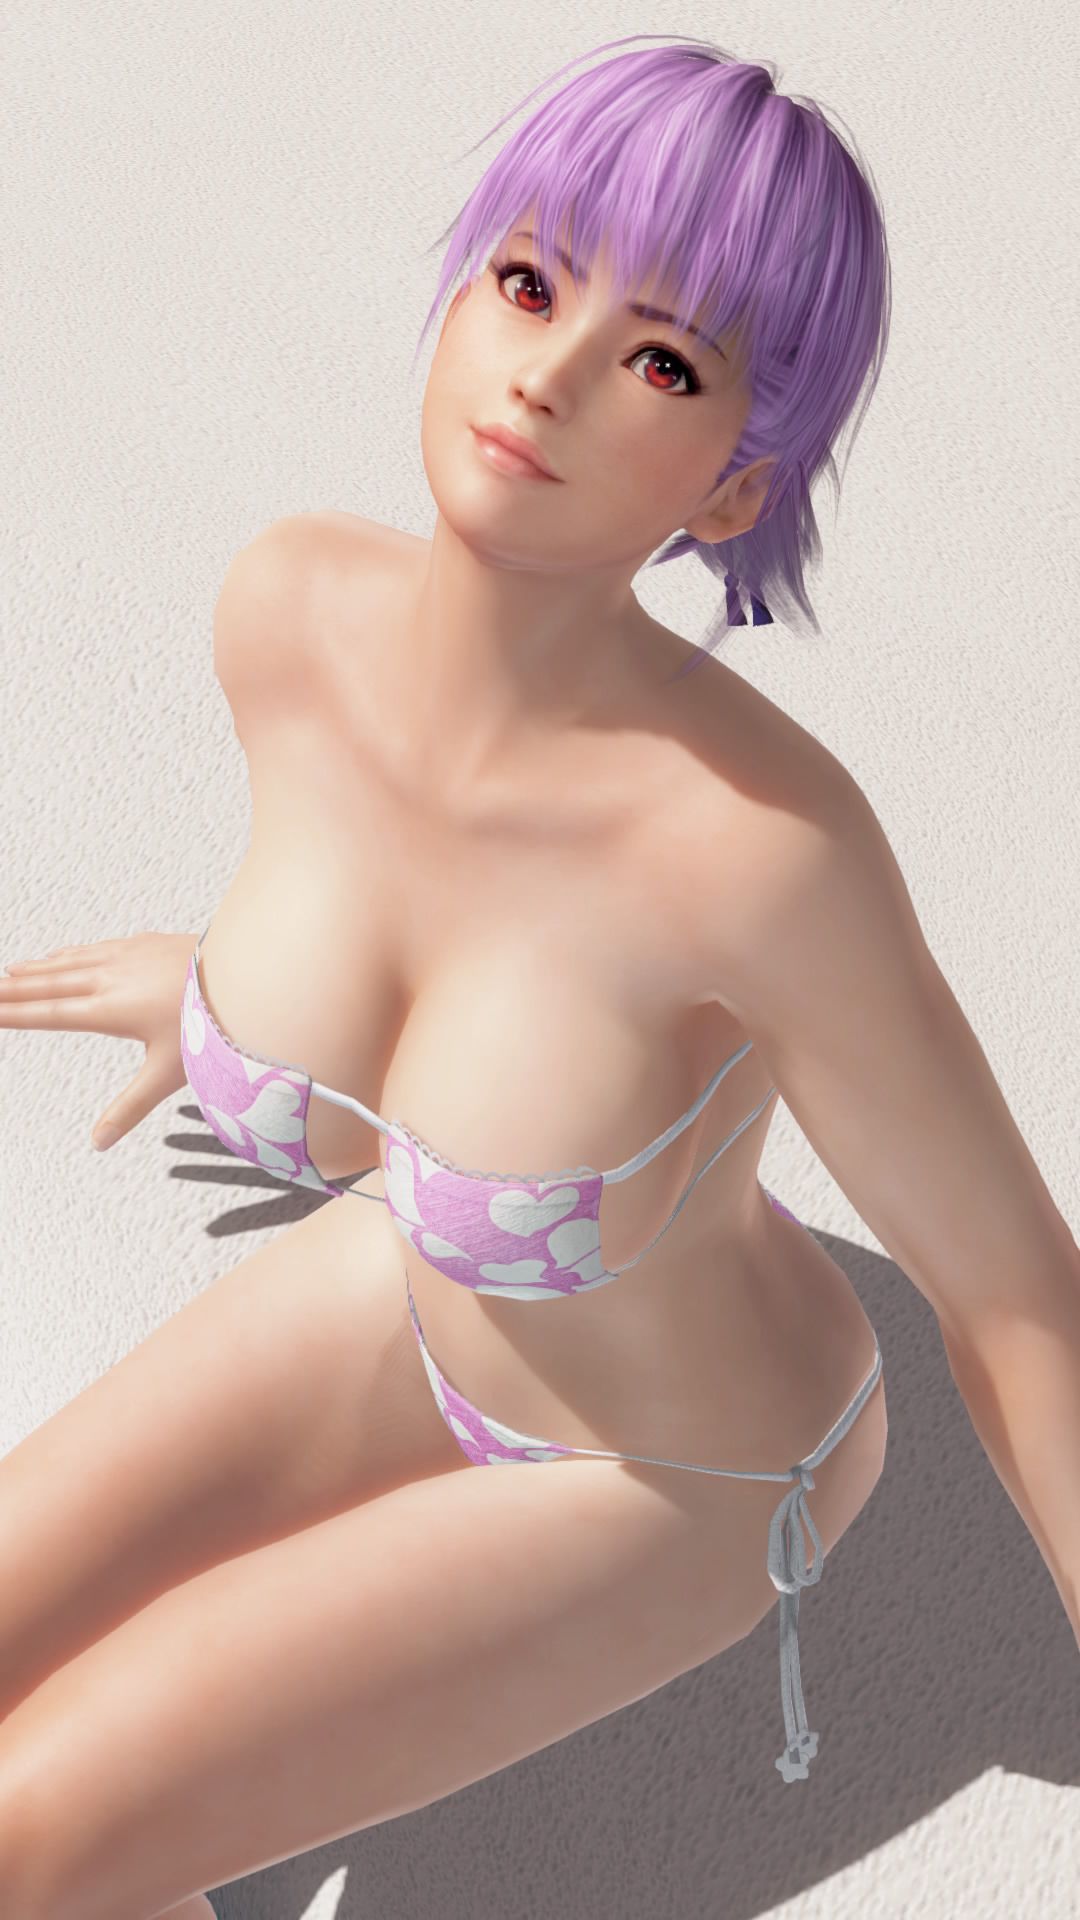 Doax3 "The color which suits the Aya-chan is pink" theory is verified 22